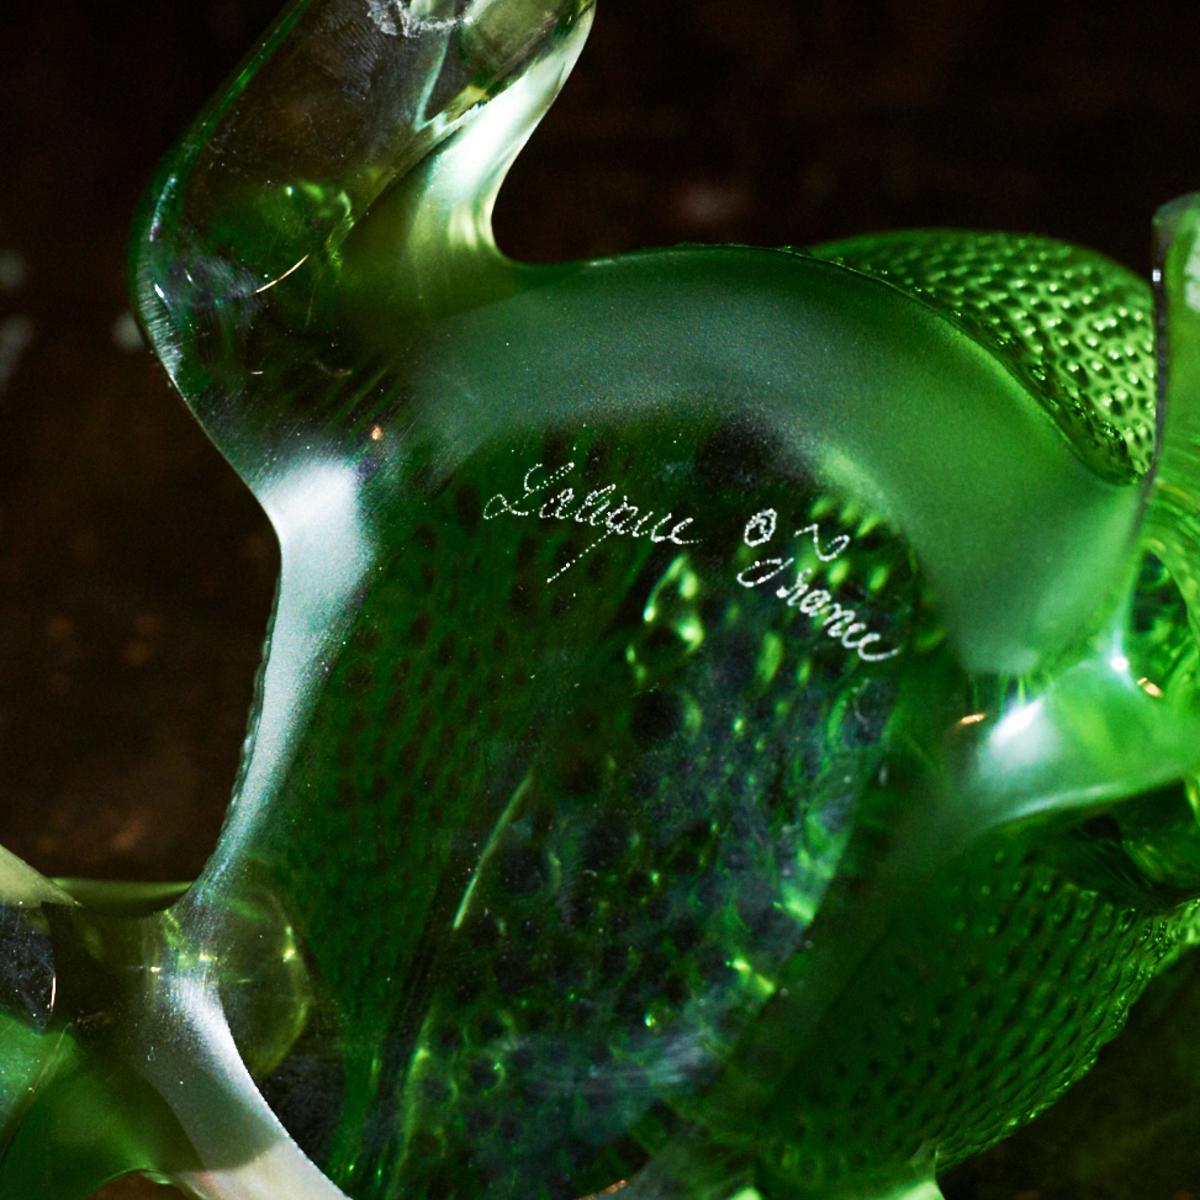 Toad frog figurine “Gregoire” in Crystal Green by Lalique?

Additional information:
Material: Crystal
Artist: Lalique
Size: 11 W X 8 D X 12 H cm.